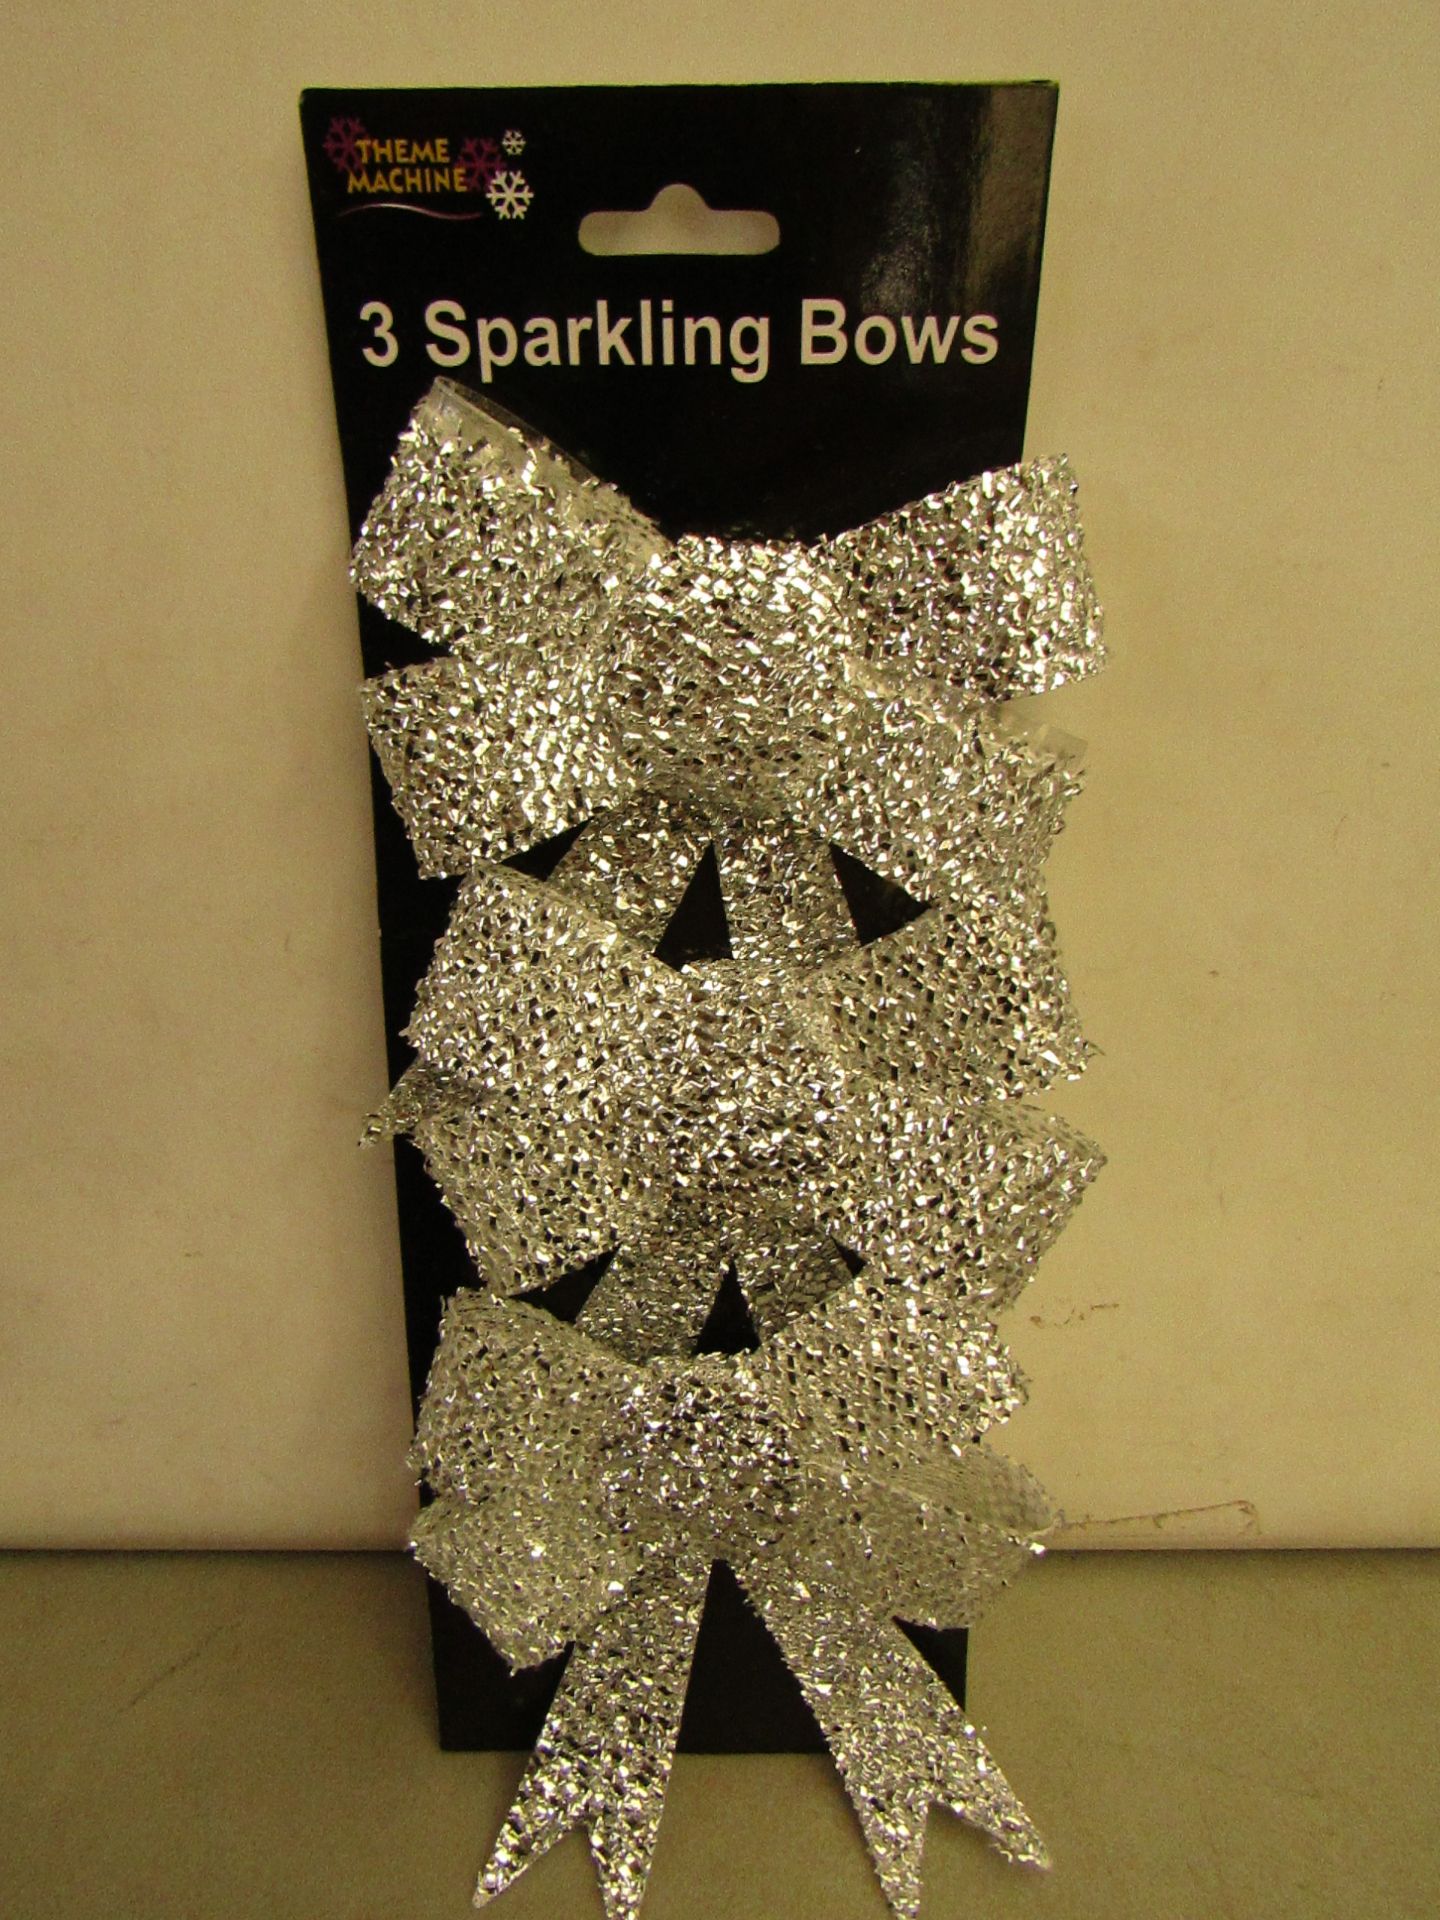 24 Packs of 3 Silver Sparkling Bows. Ideal for Xmas Trees. New & packaged